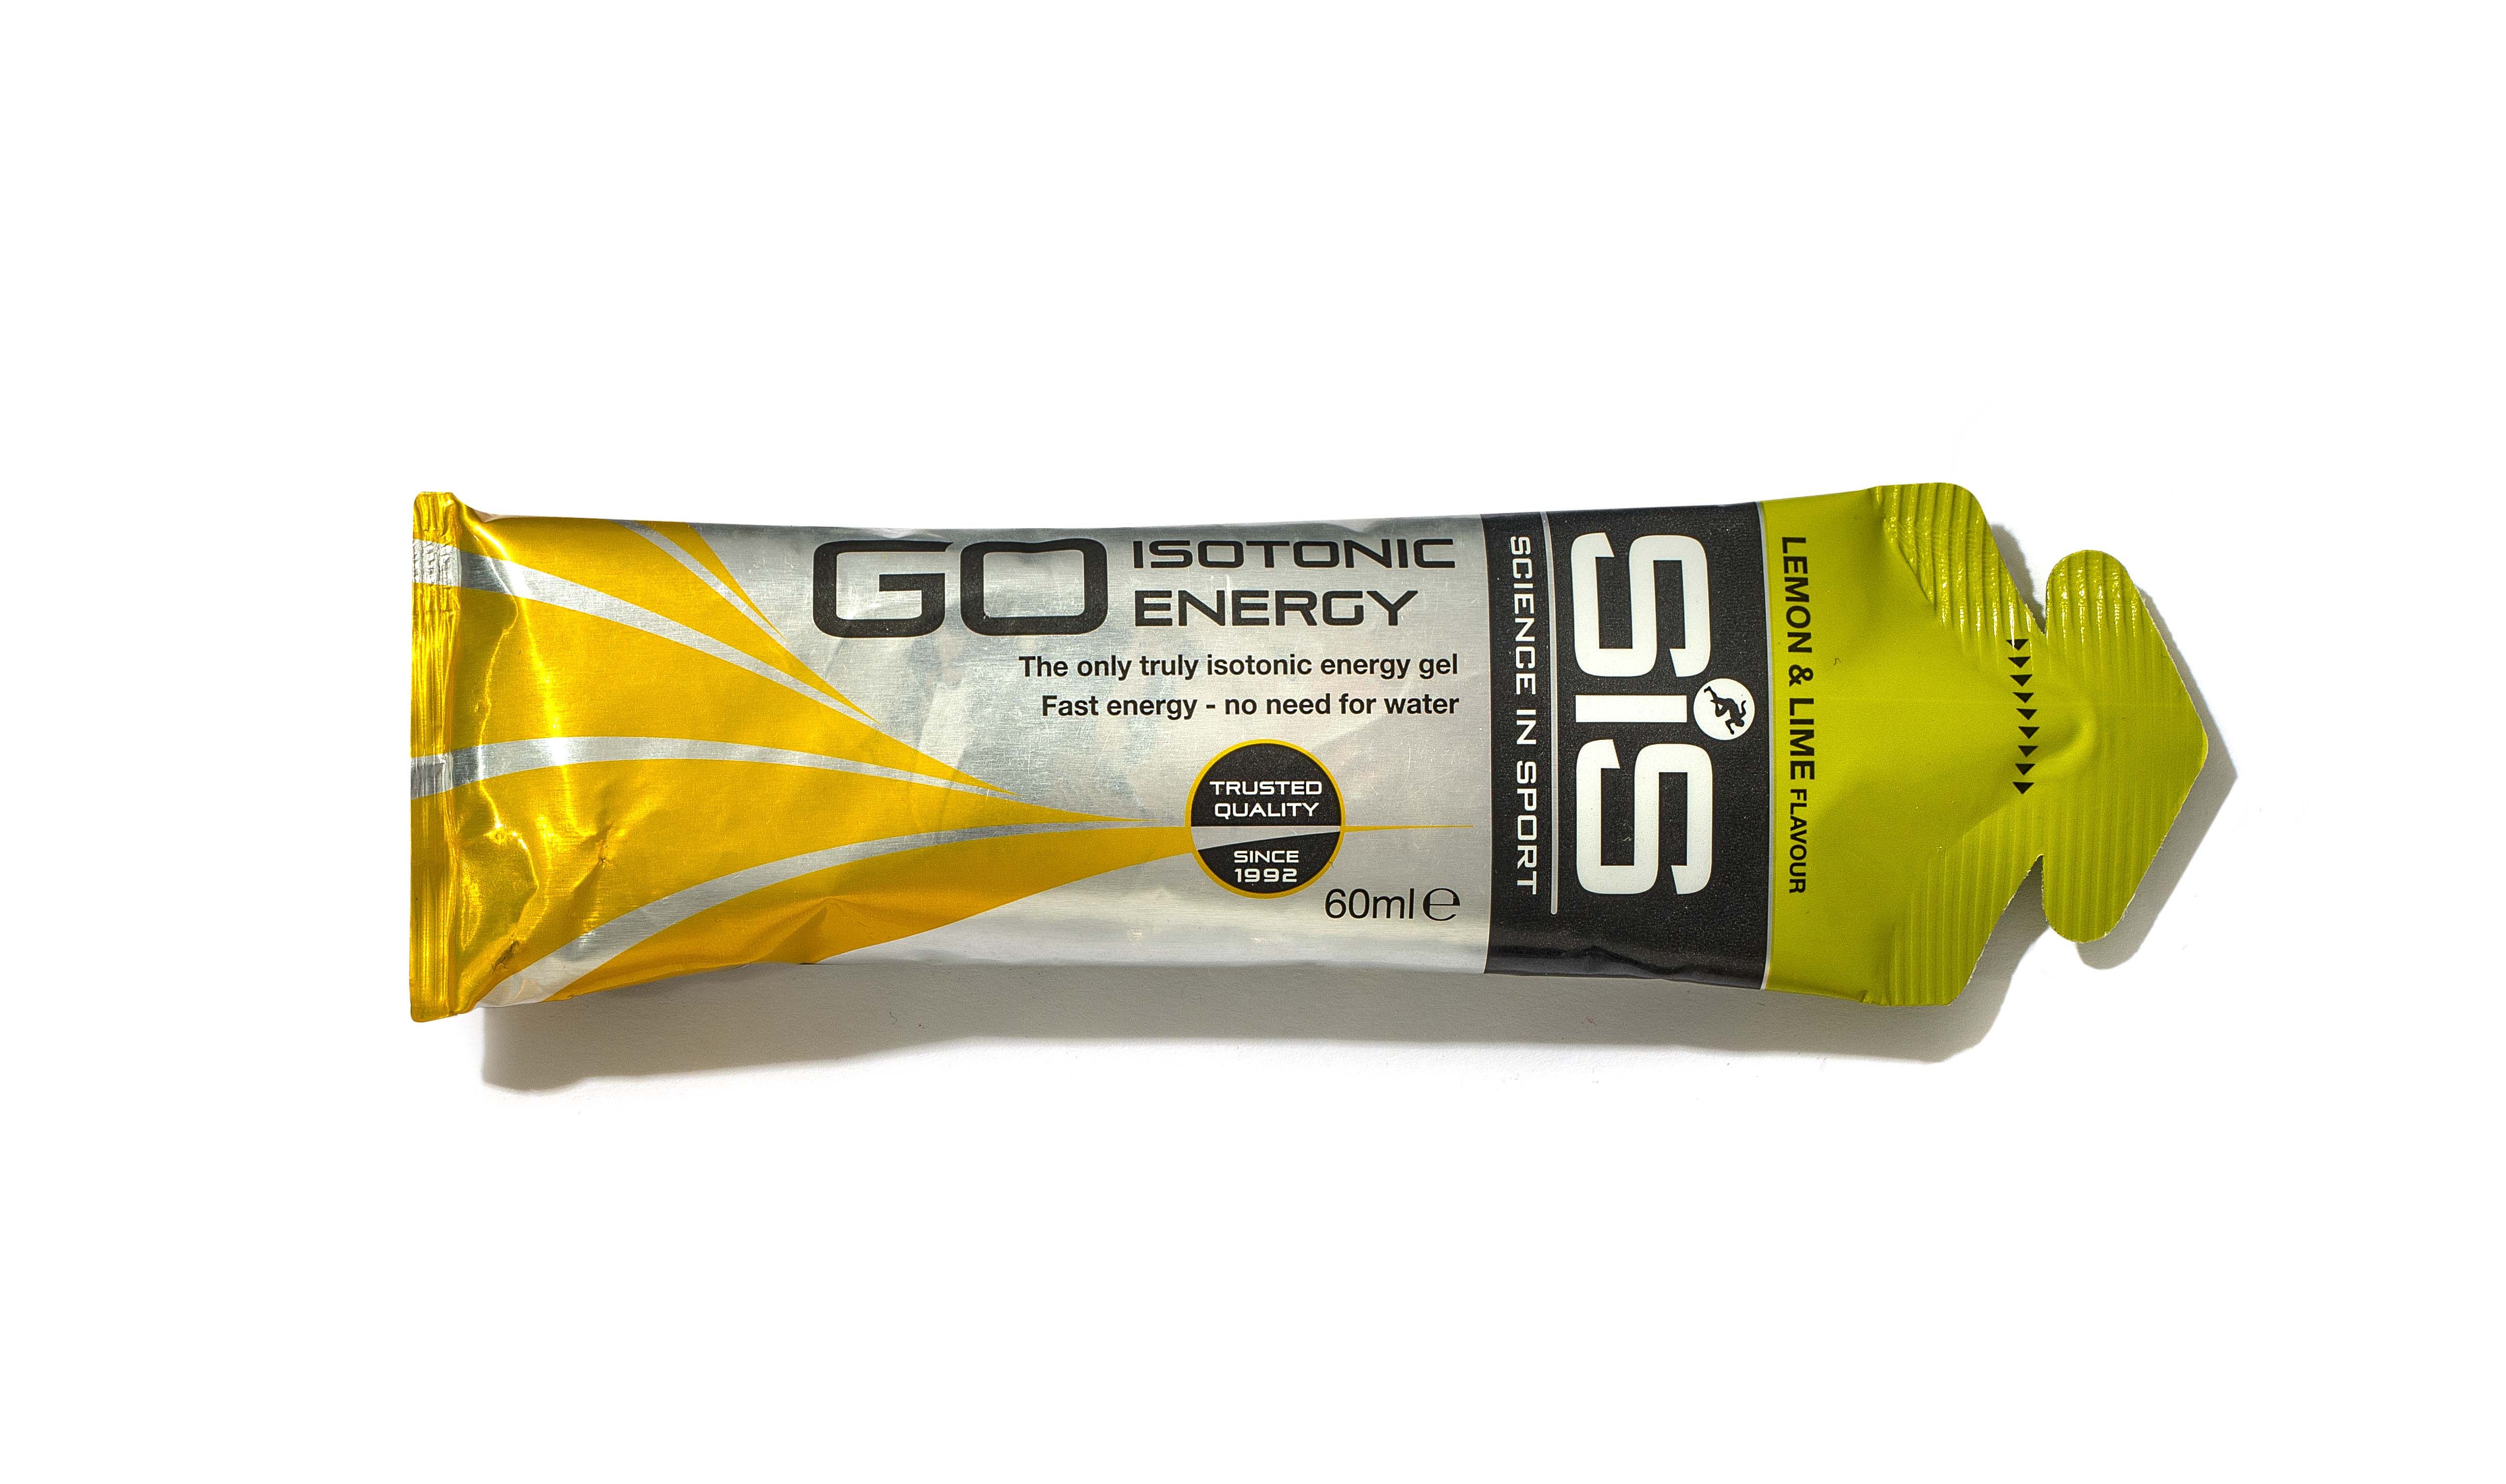 13 of the best running gels, sweets and 